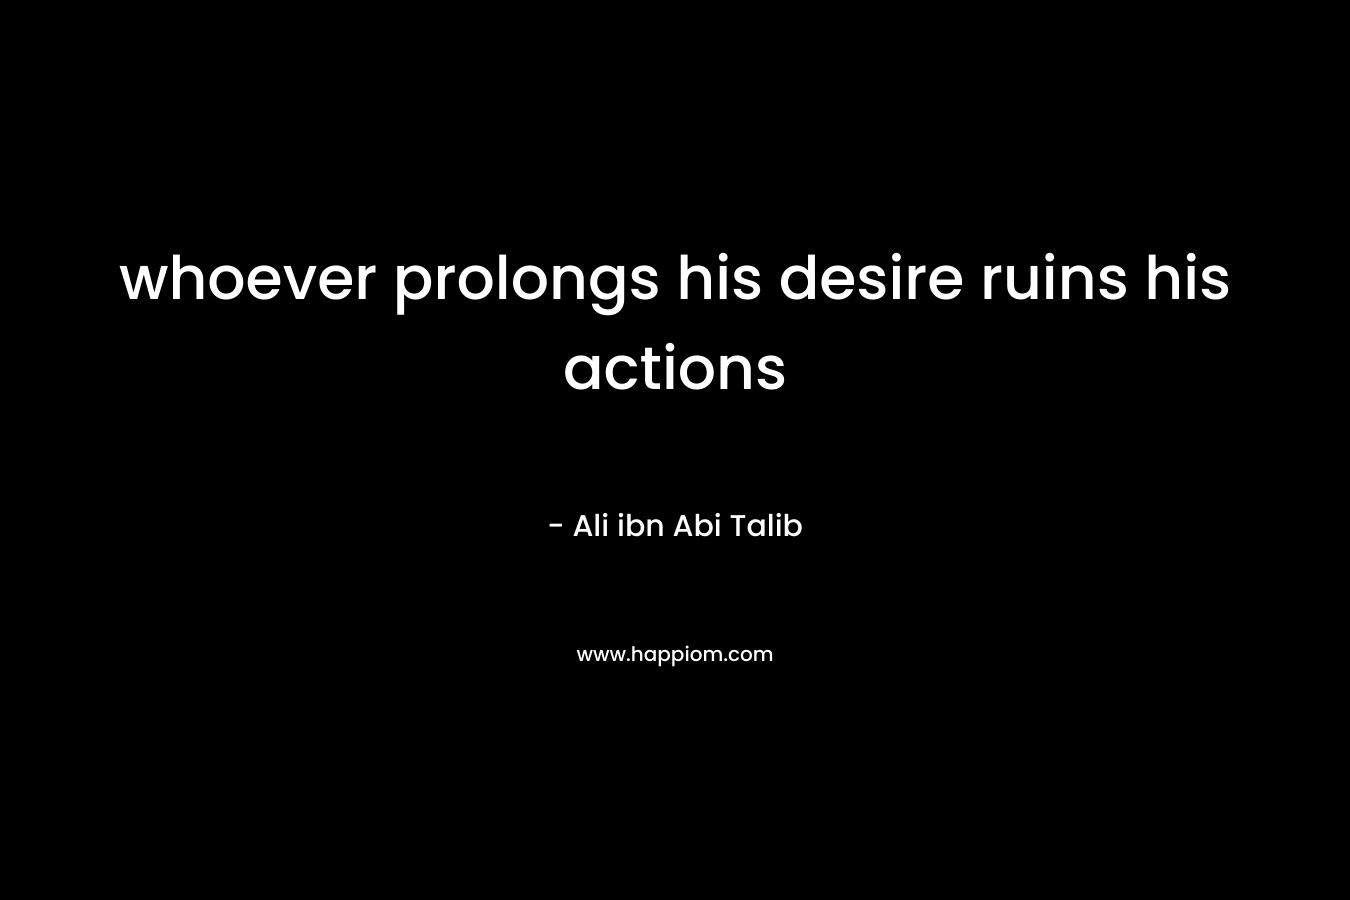 whoever prolongs his desire ruins his actions